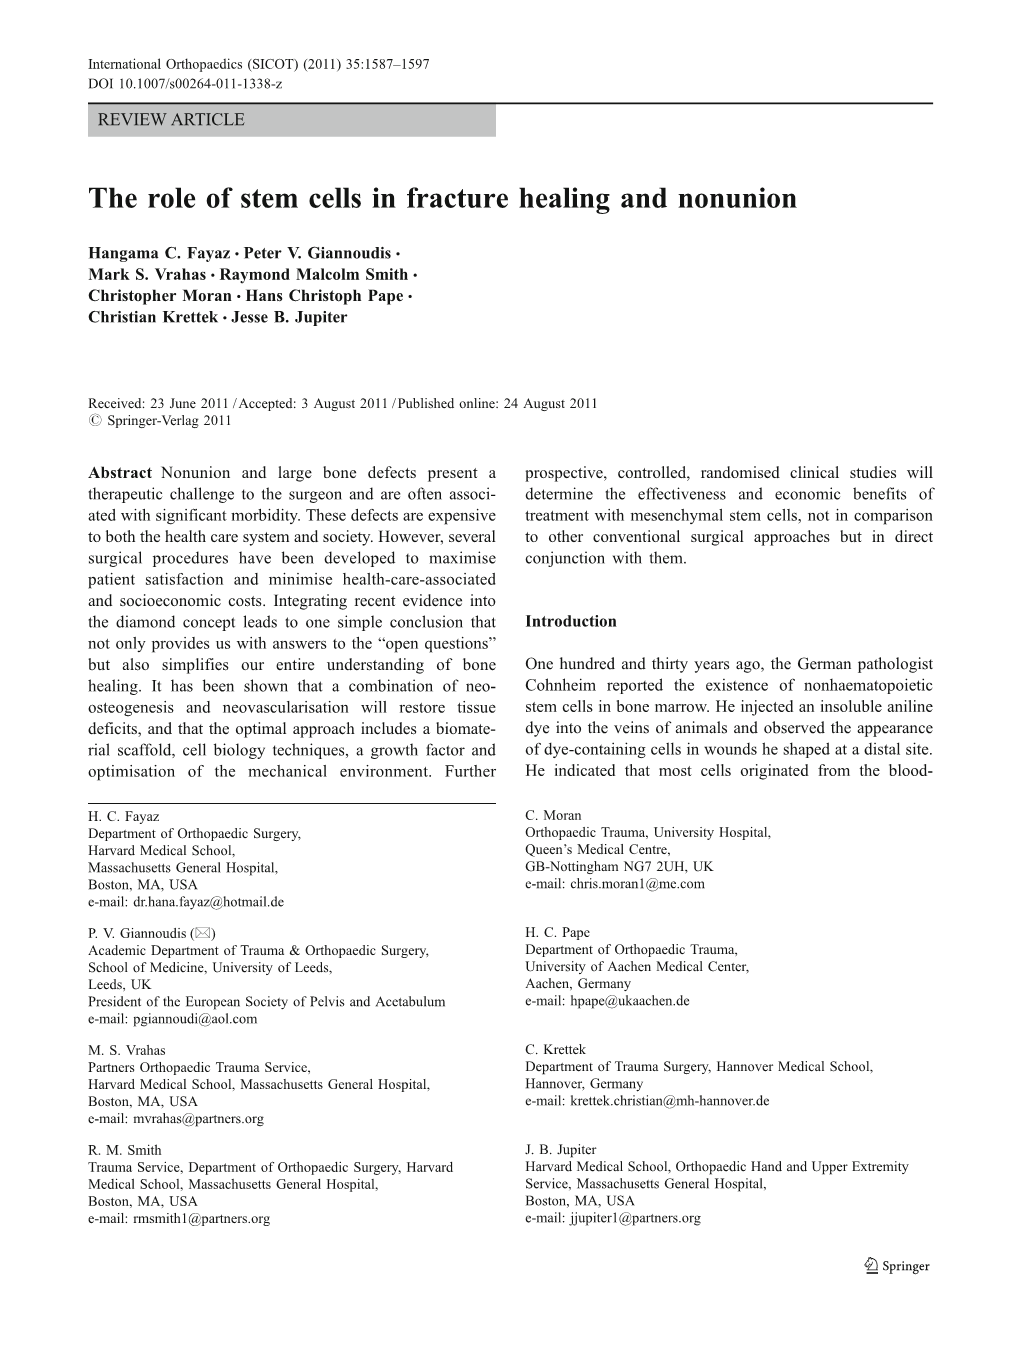 The Role of Stem Cells in Fracture Healing and Nonunion